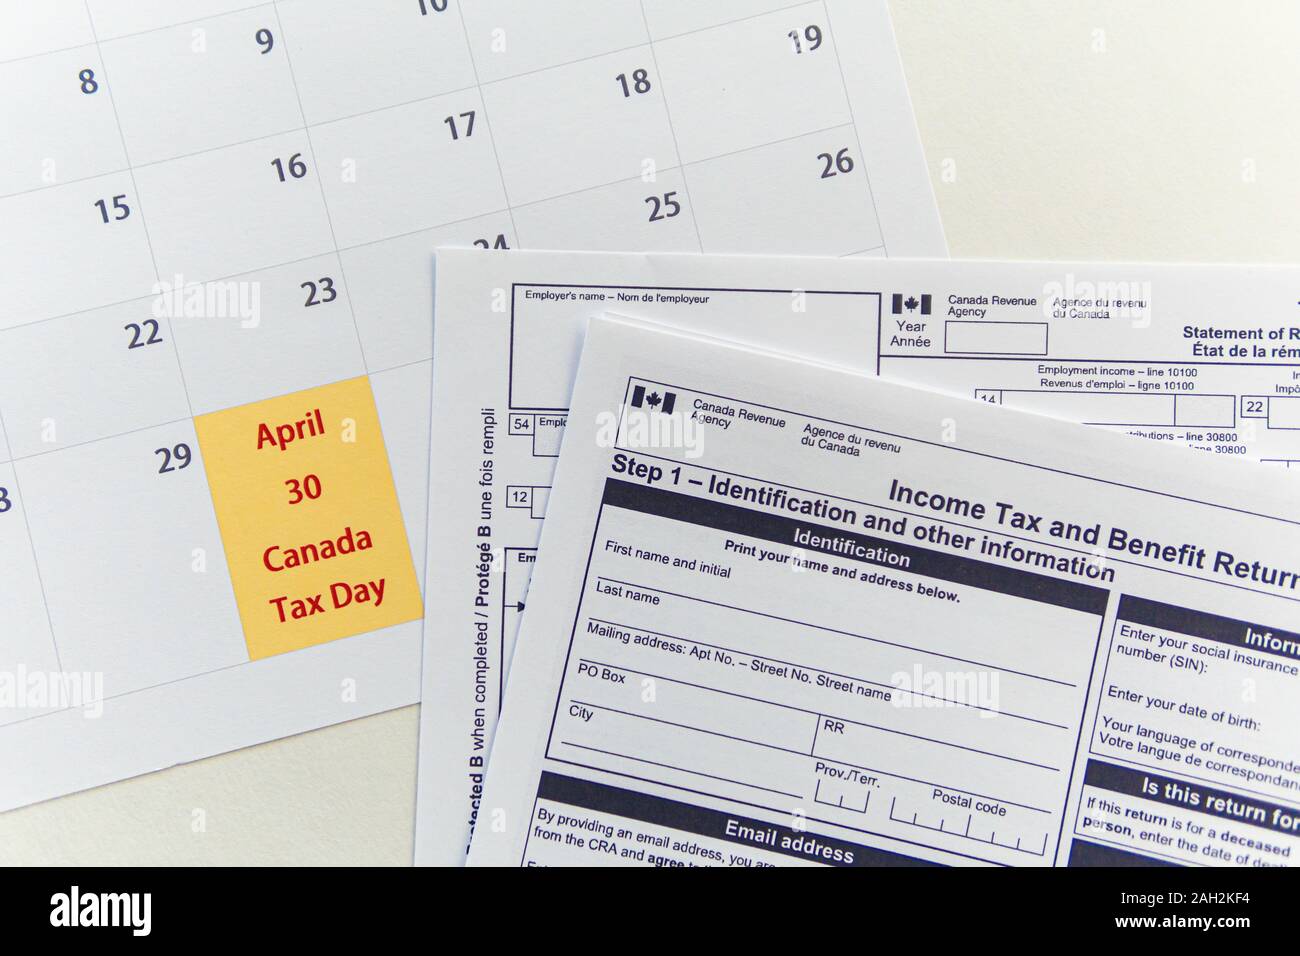 April 30 - Canada Tax Day . Deadline to sub,it Personal Income Tax Returns  Stock Photo - Alamy